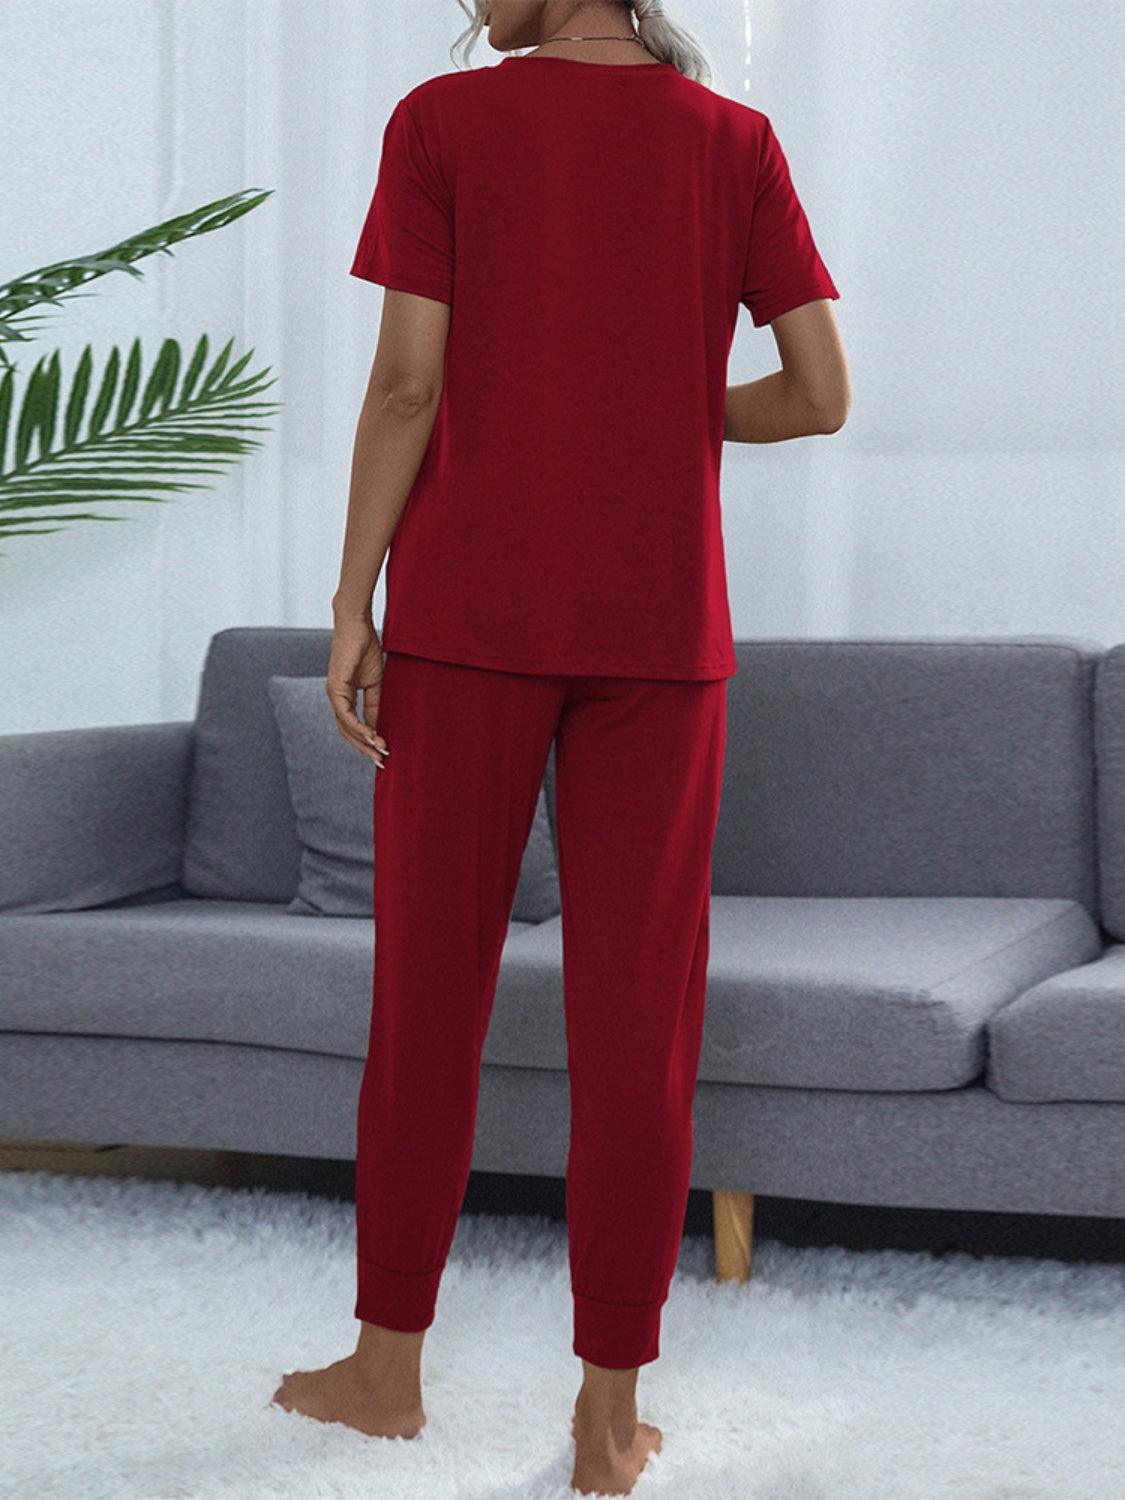 a woman standing in a living room wearing a red pajama set